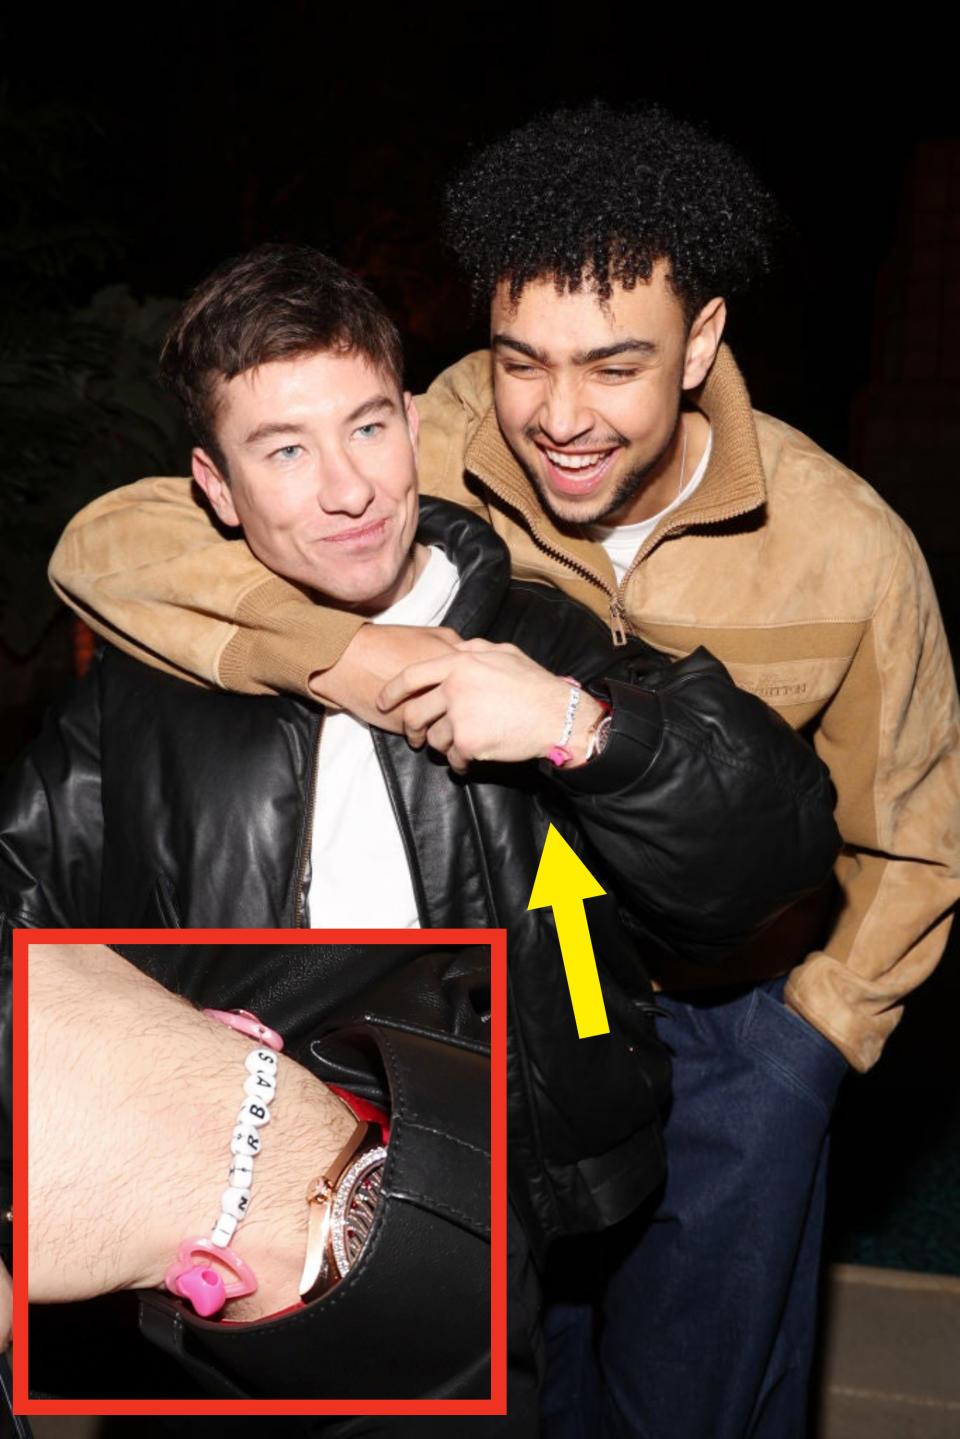 The two men smiling and embracing, the bracelet shown on barry's wrist